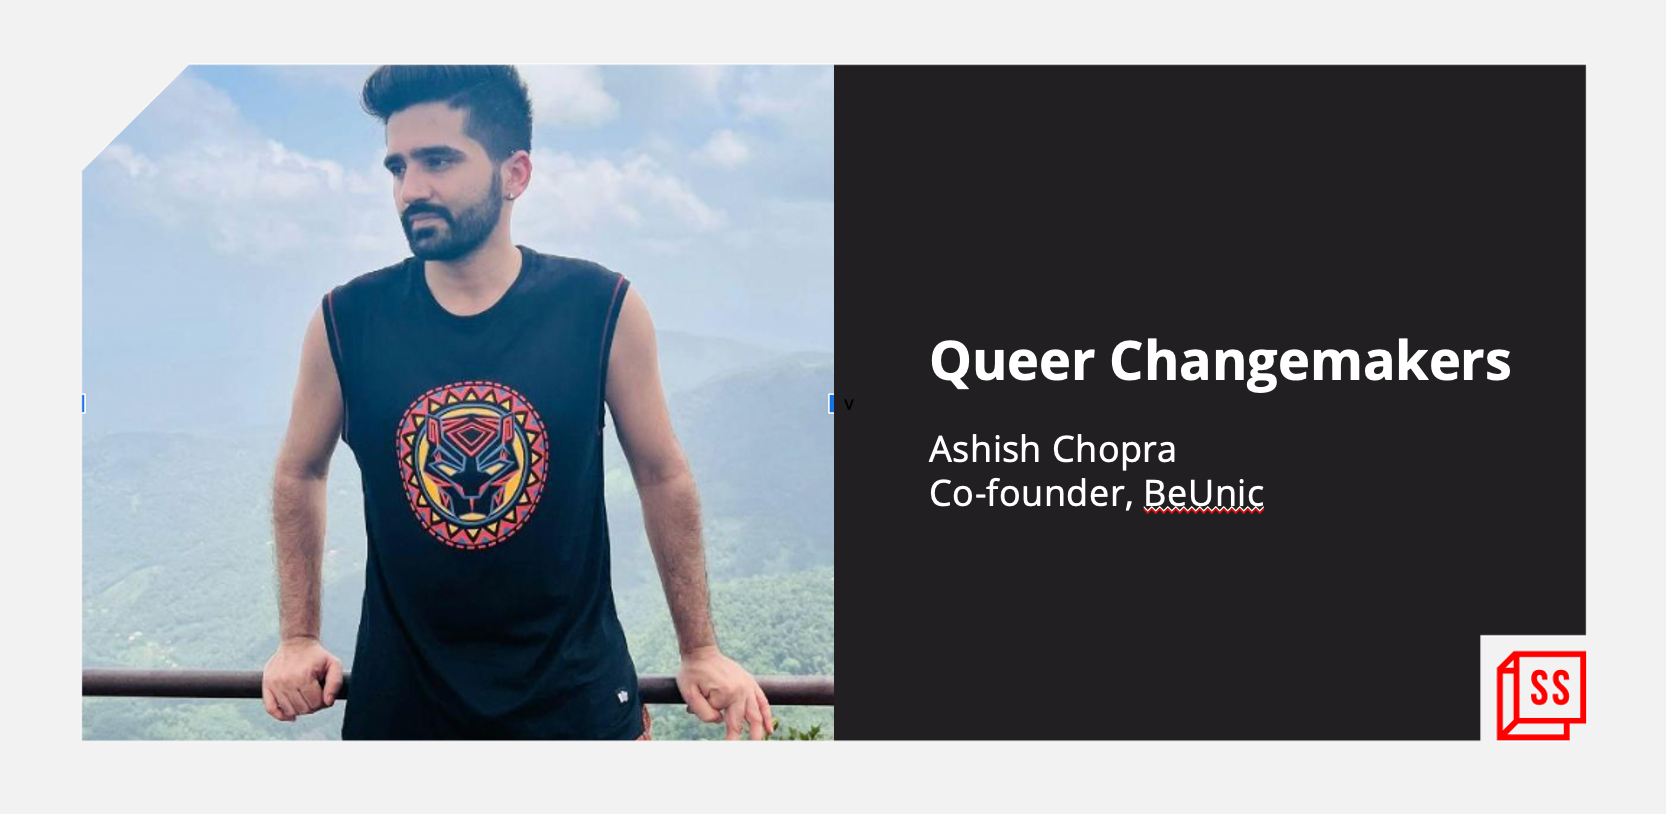 [Queer Changemakers] This e-commerce platform is bringing Queer entrepreneurs to the mainstream

